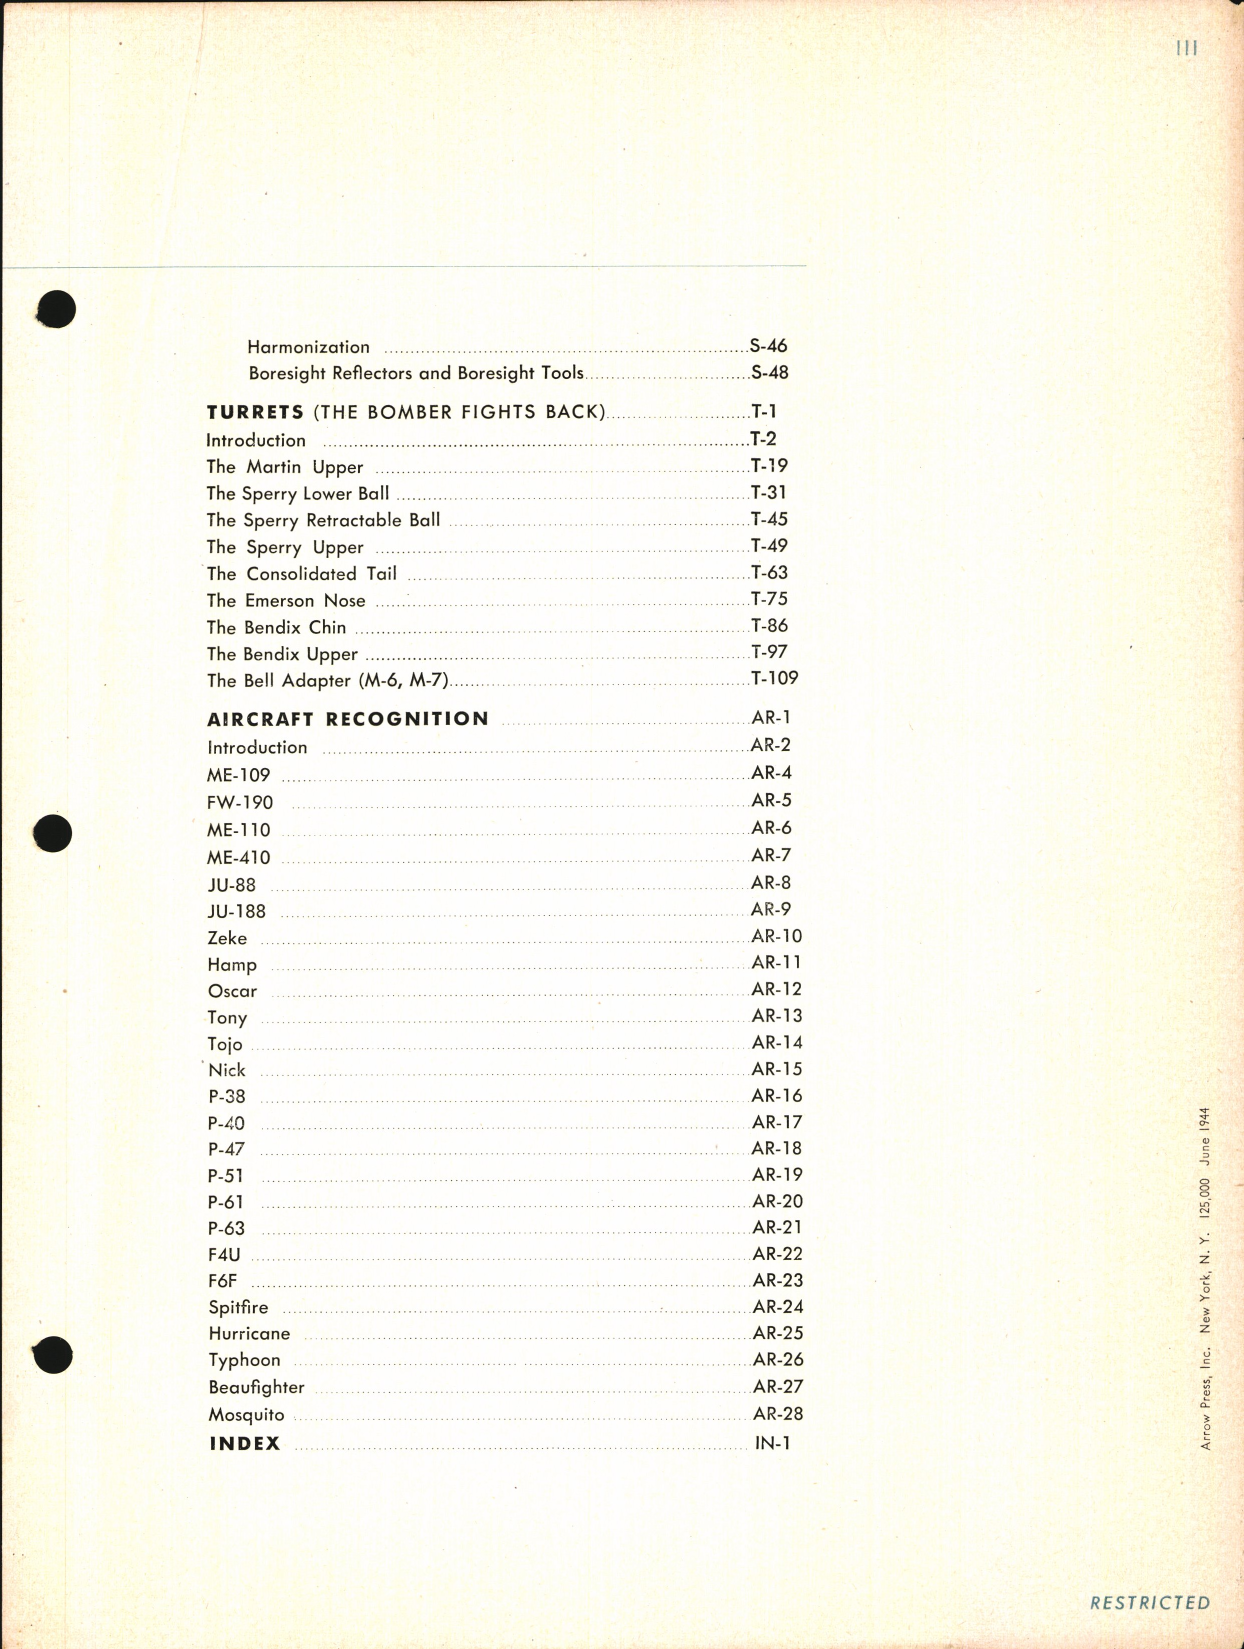 Sample page 5 from AirCorps Library document: Gunner's Information File - Flexible Gunnery